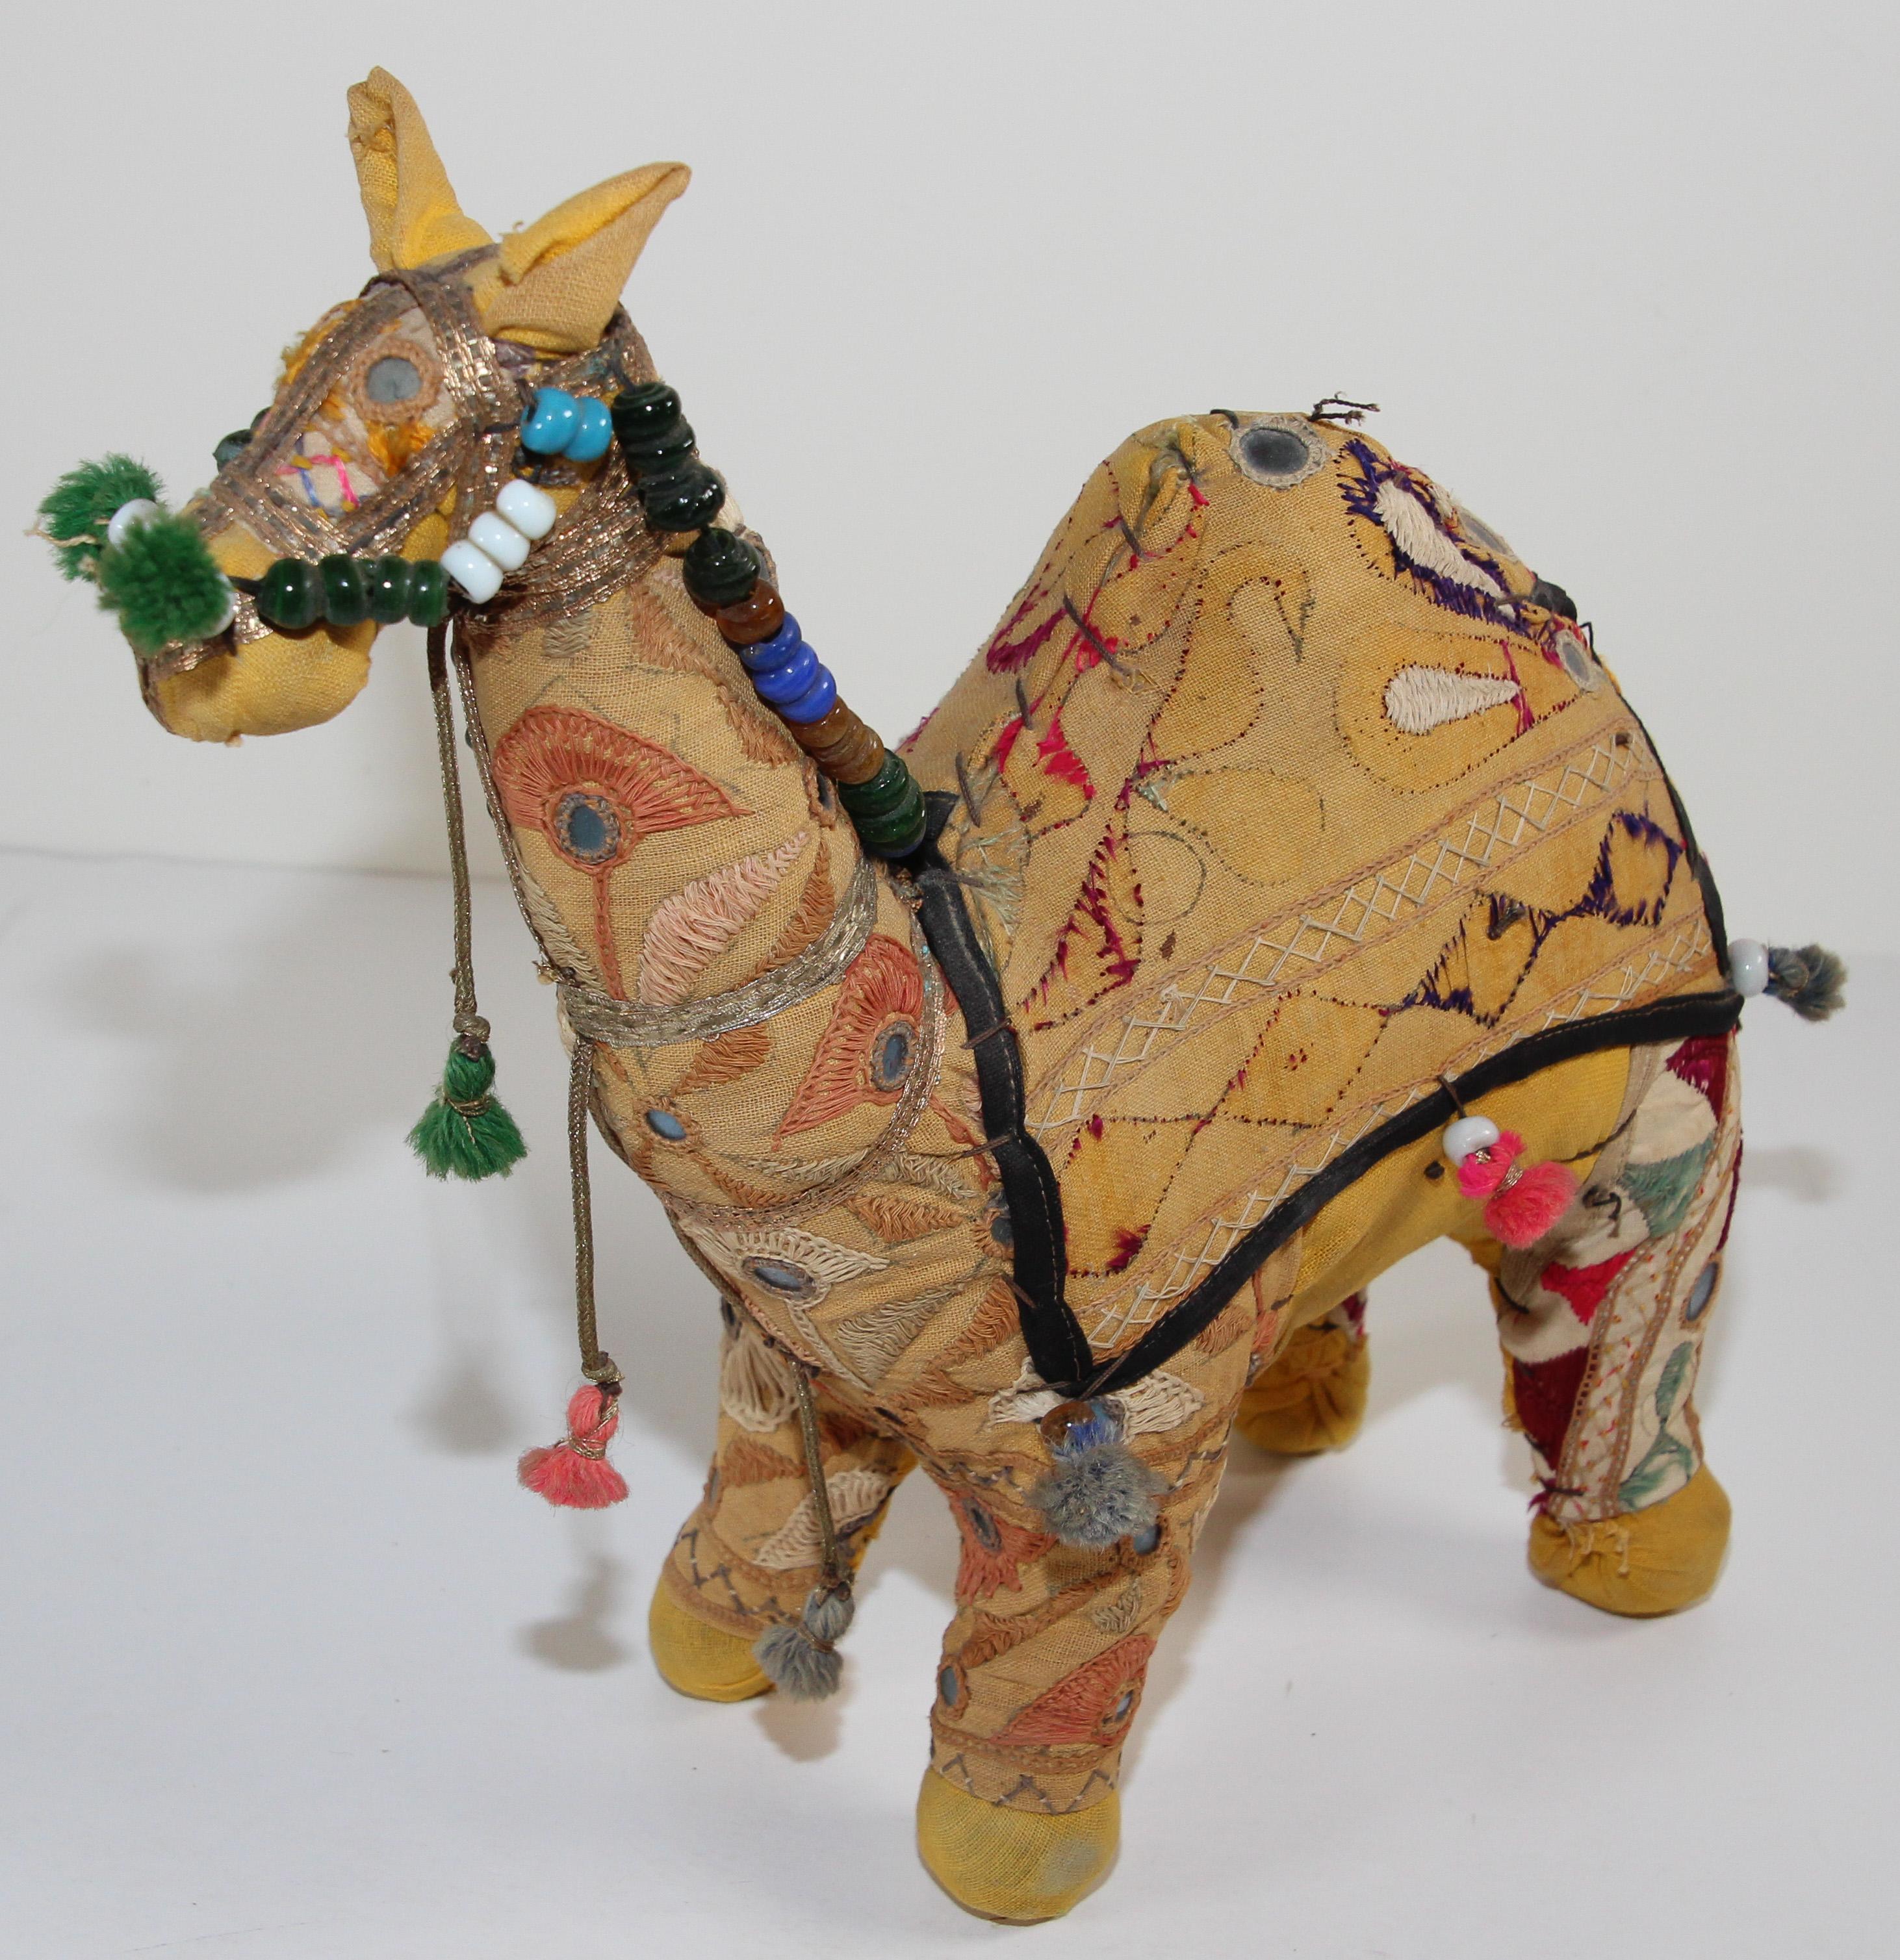 Handmade in Rajasthan, India, colorful fabric camel toy.
Vintage small camel stuffed cotton embroidered and decorated with small mirrors, great collector piece.
Anglo Raj, small stuffed camel wearing the ceremonial folk attire made from